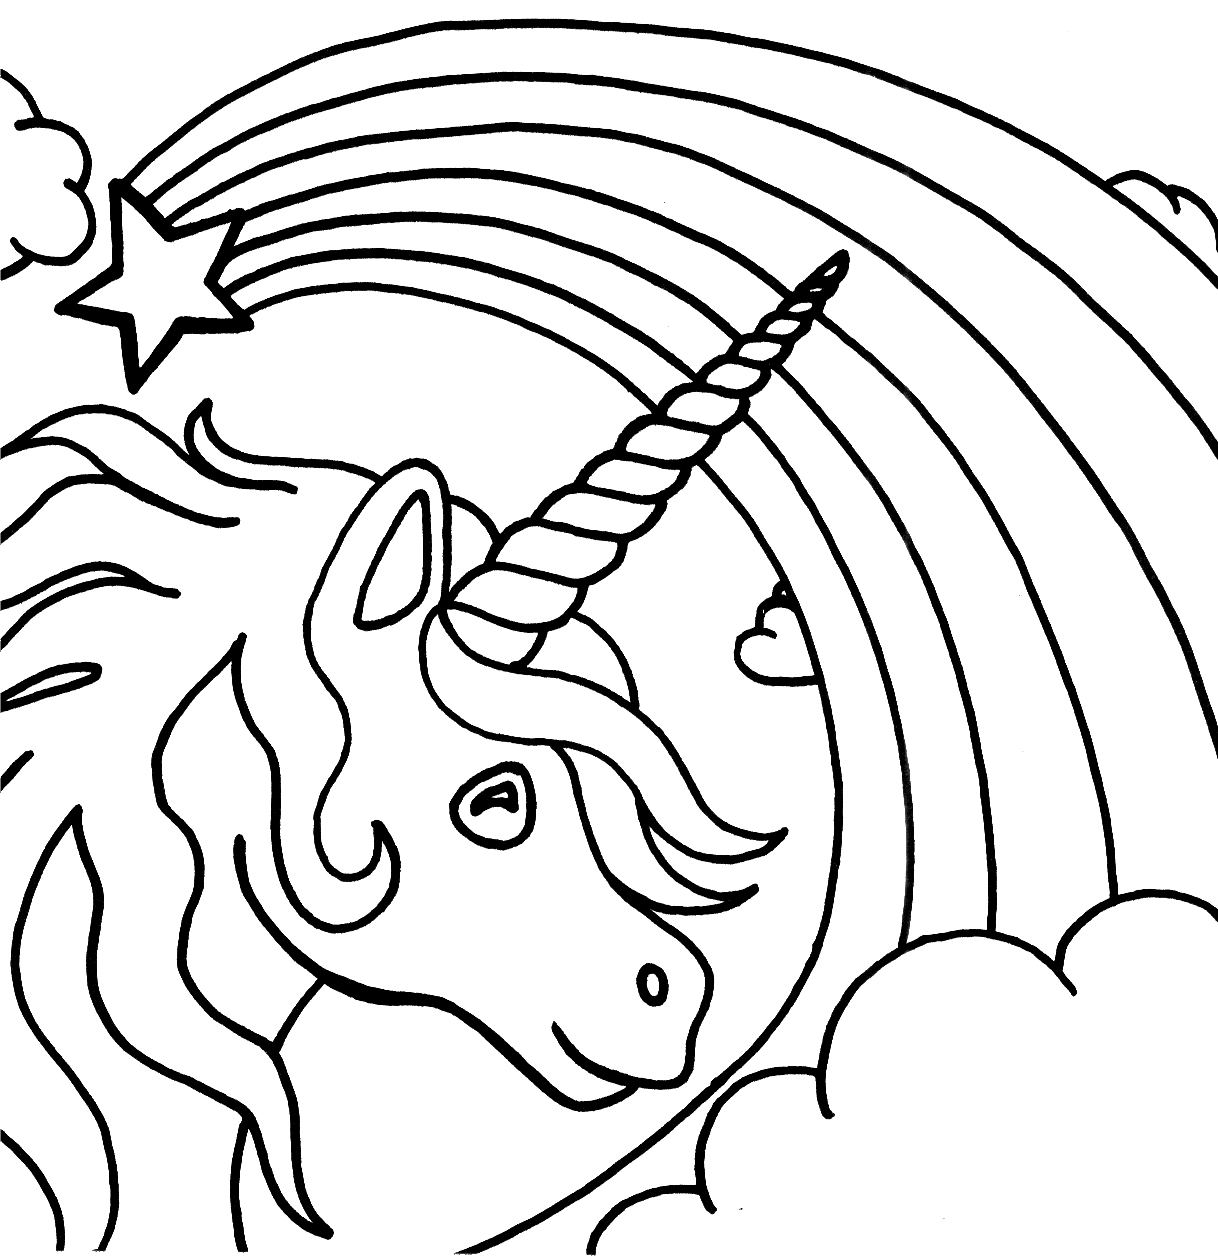 Drawing Unicorn 20 Characters – Printable coloring pages